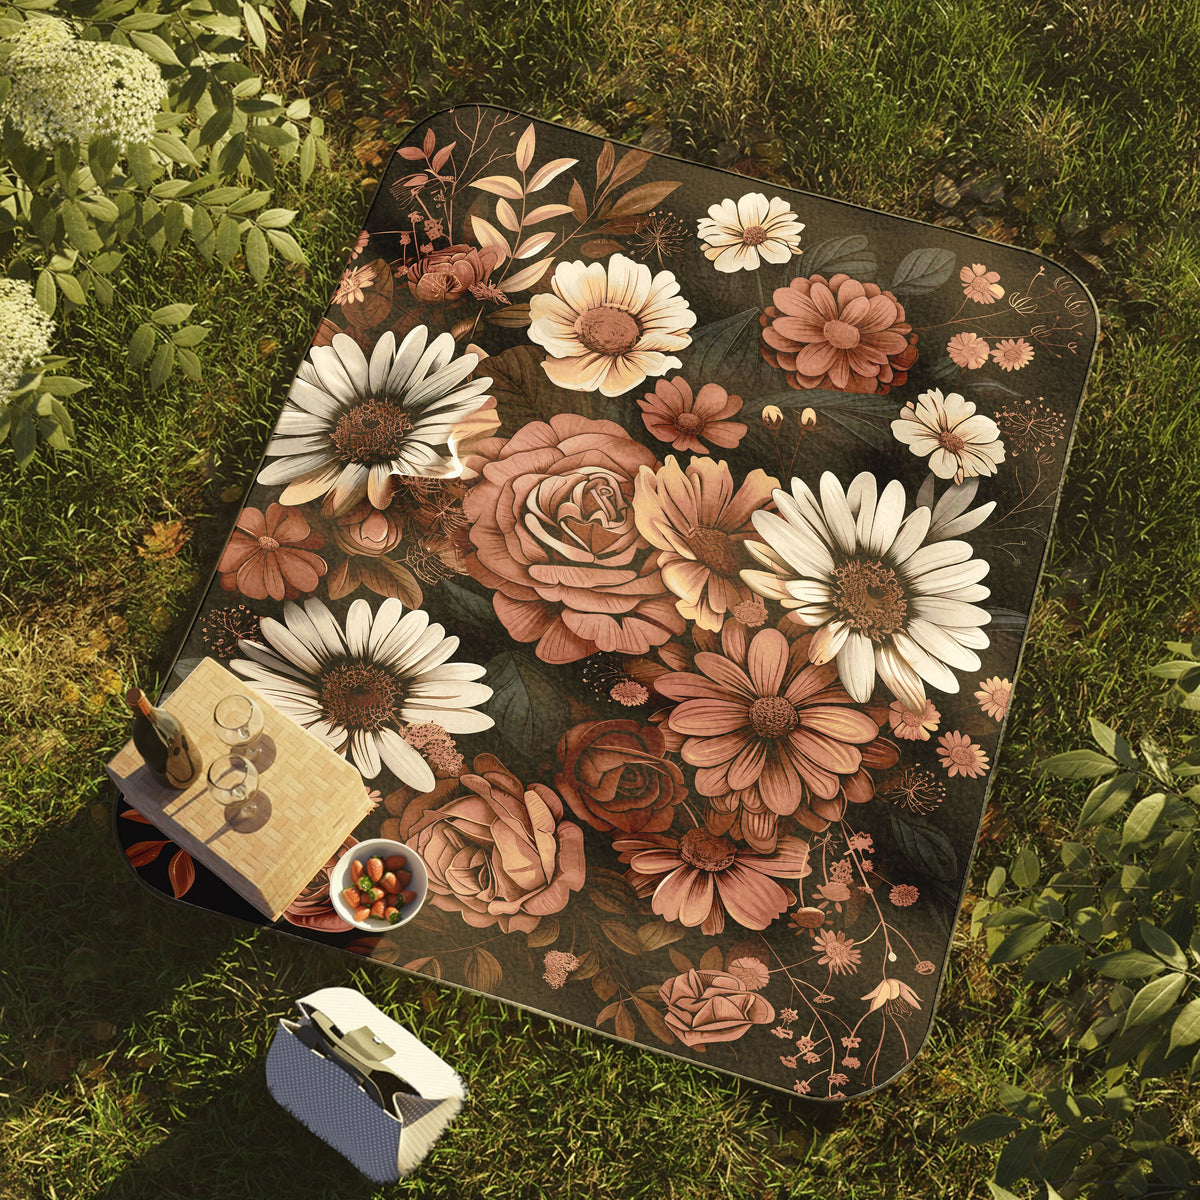 a picnic blanket with flowers on it in the grass